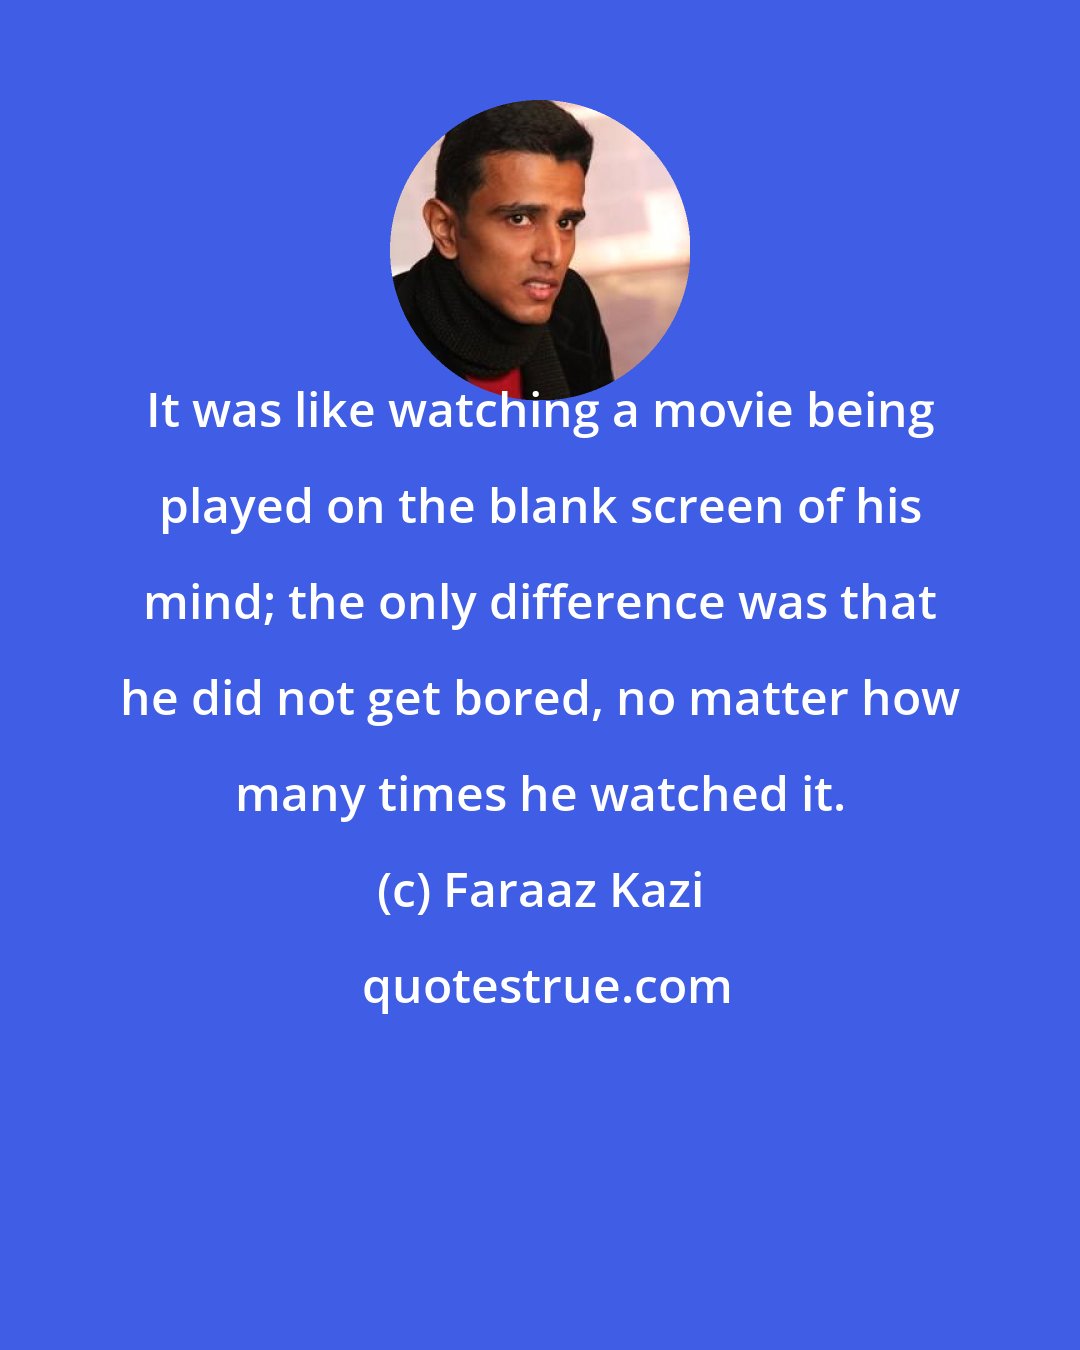 Faraaz Kazi: It was like watching a movie being played on the blank screen of his mind; the only difference was that he did not get bored, no matter how many times he watched it.